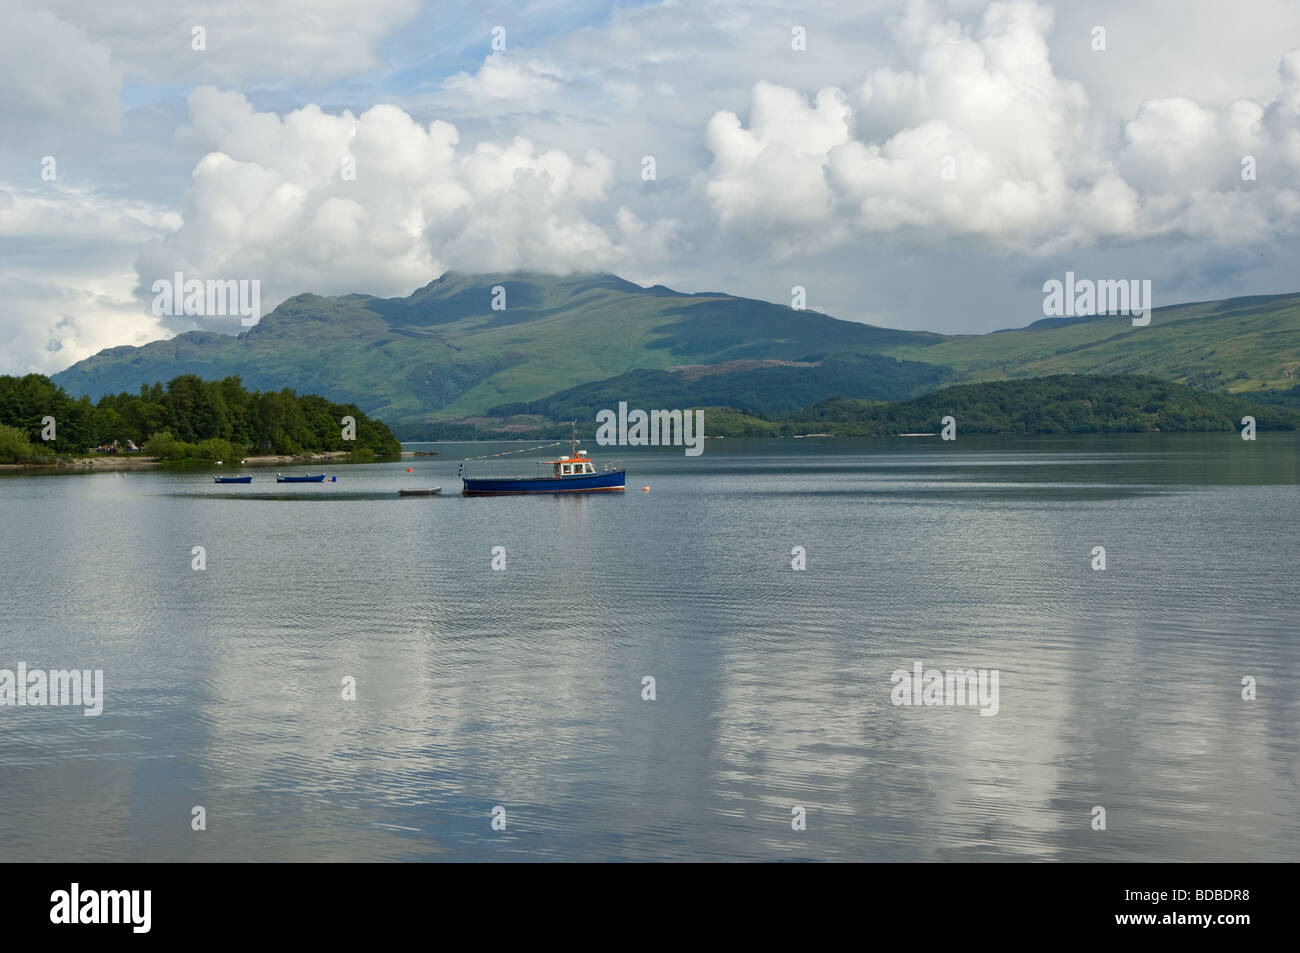 Pleasure or tourist sightseeing boat on Loch Lomond just off a village called Luss, Scotland. Stock Photo